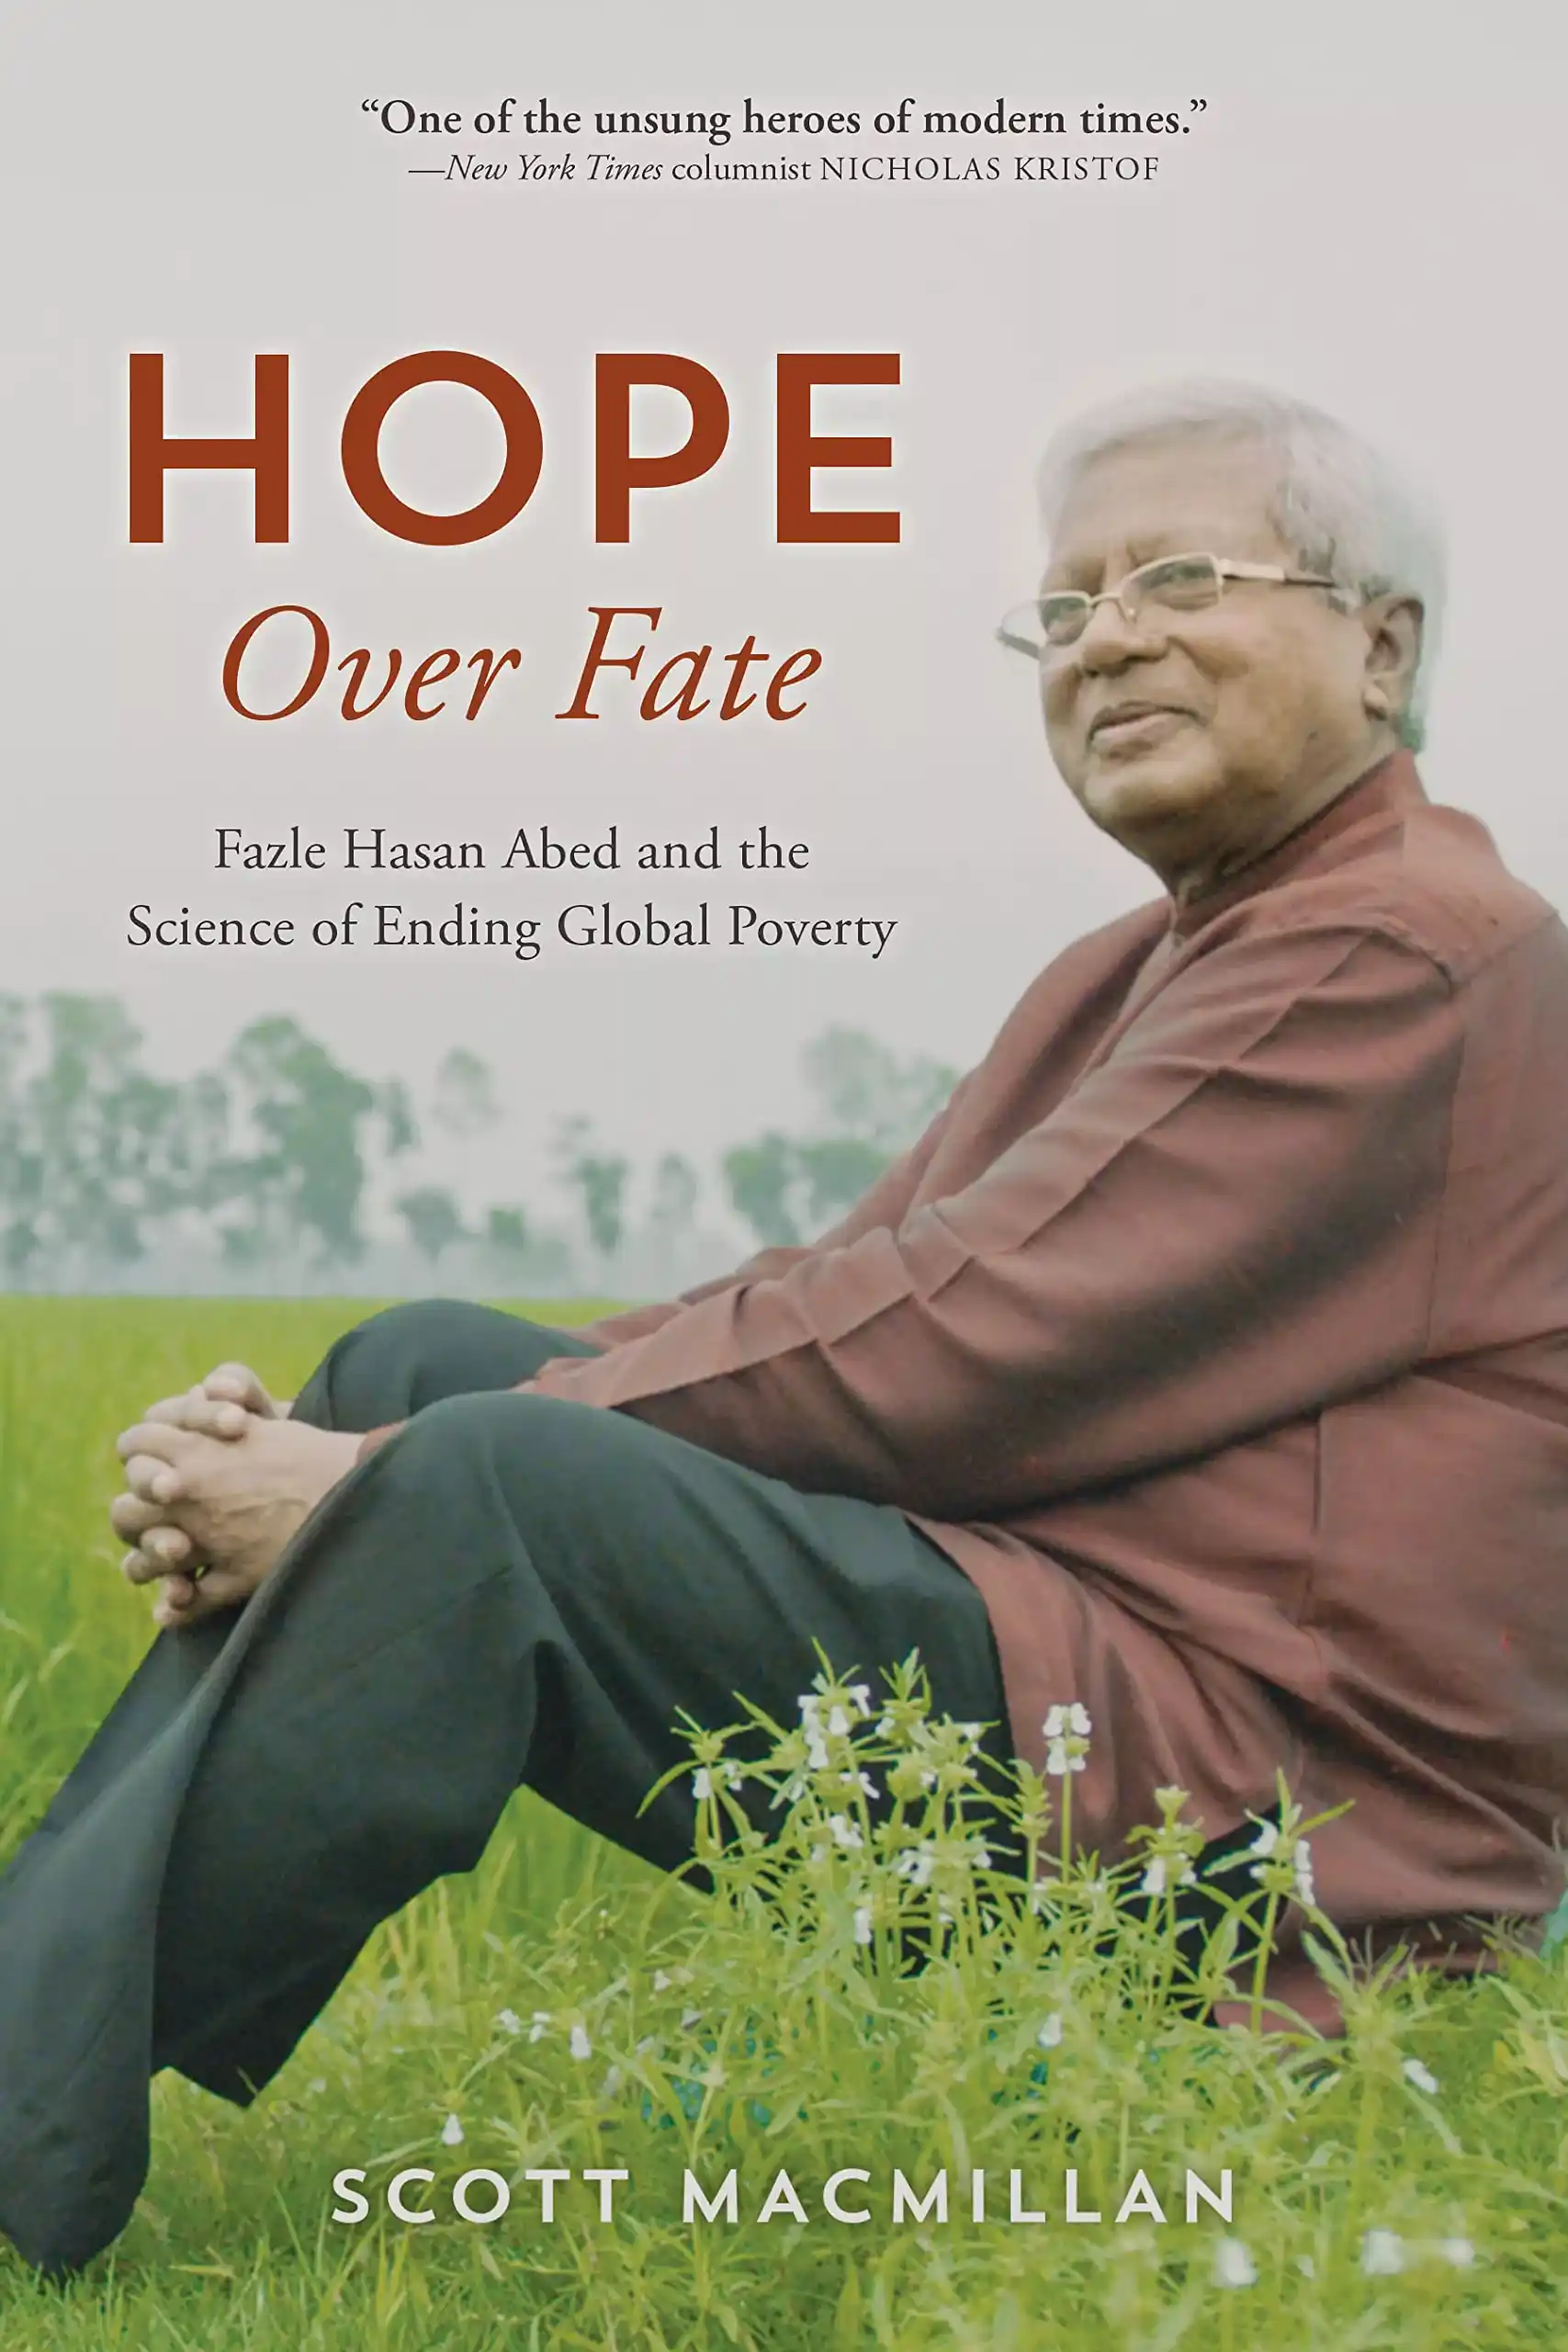 Hope Over Fate: Fazle Hasan Abed and the Science of Ending Global Poverty by Scott Macmillan